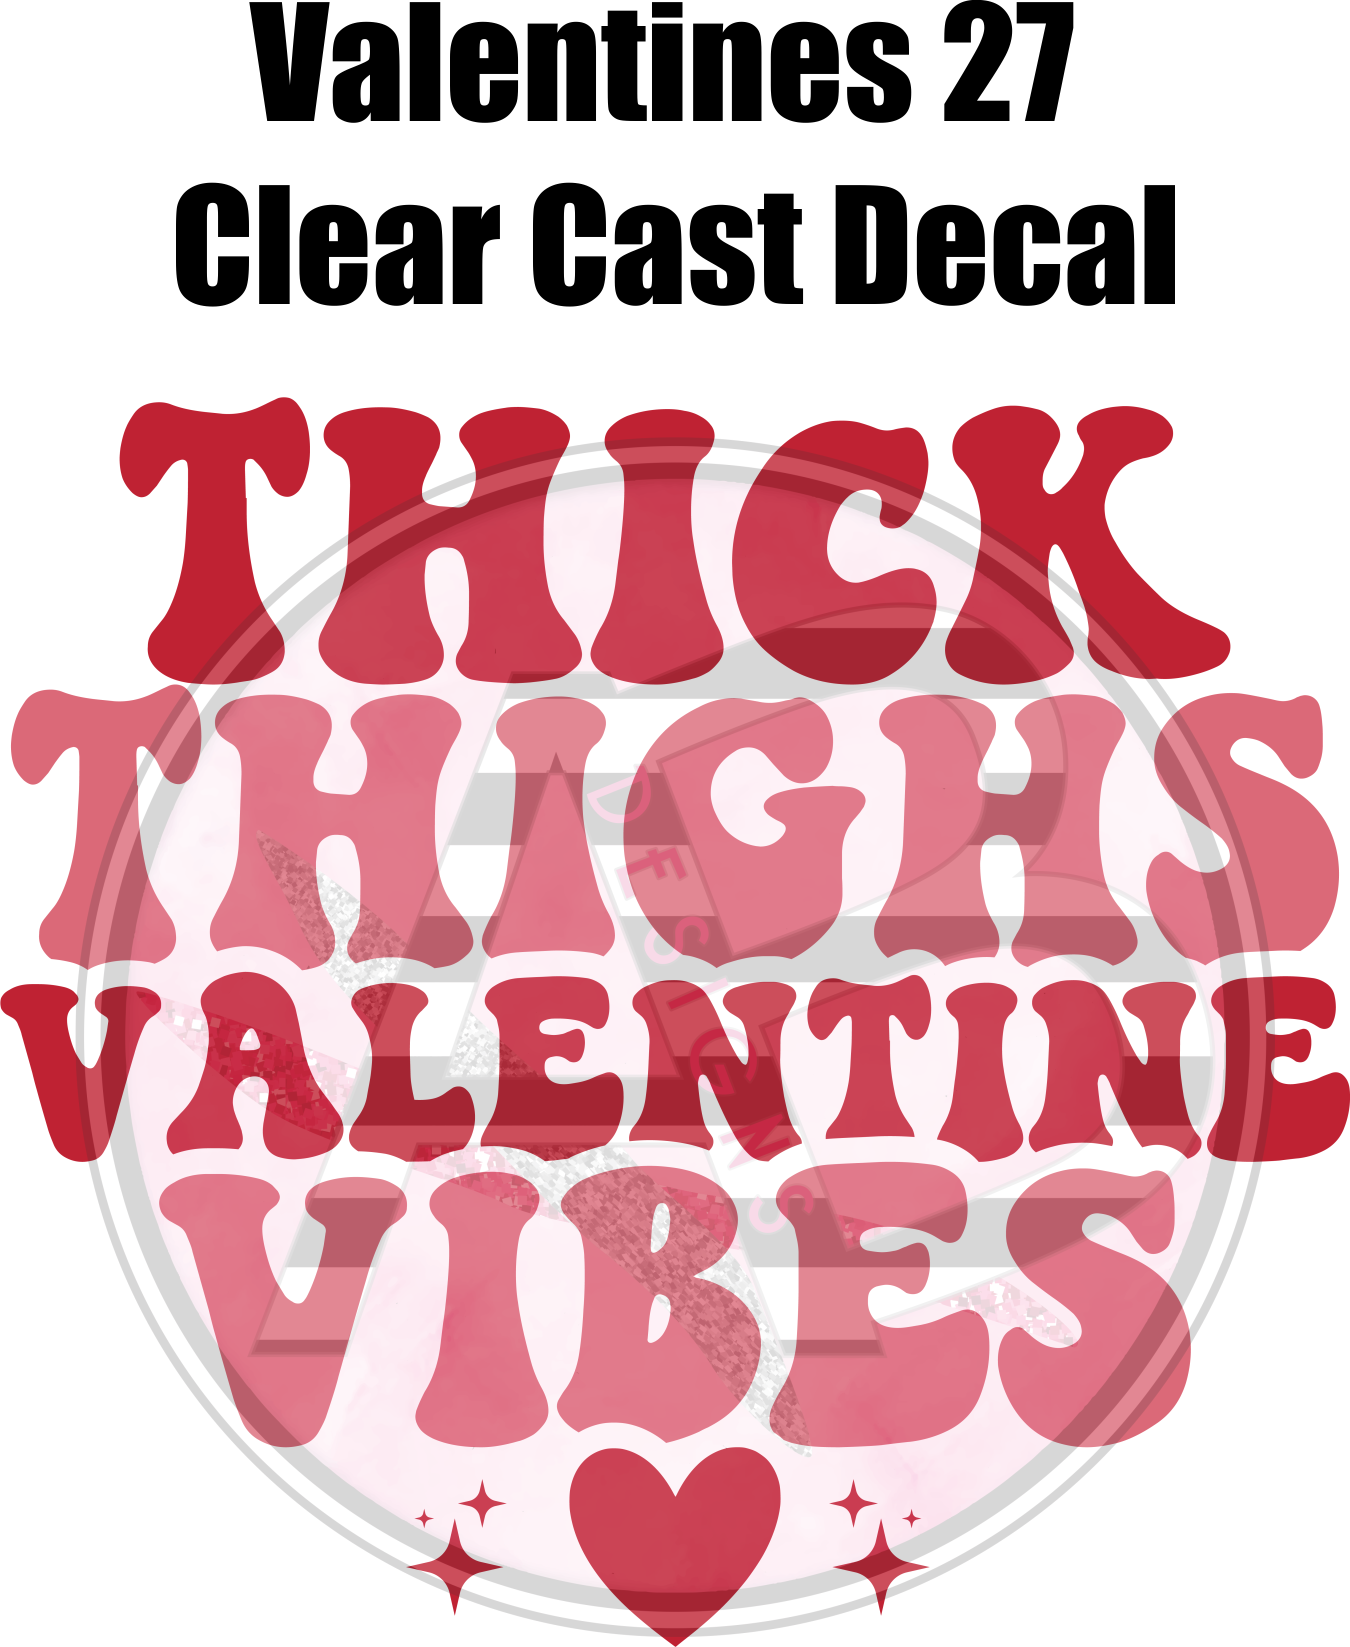 Valentines 27 - Clear Cast Decal